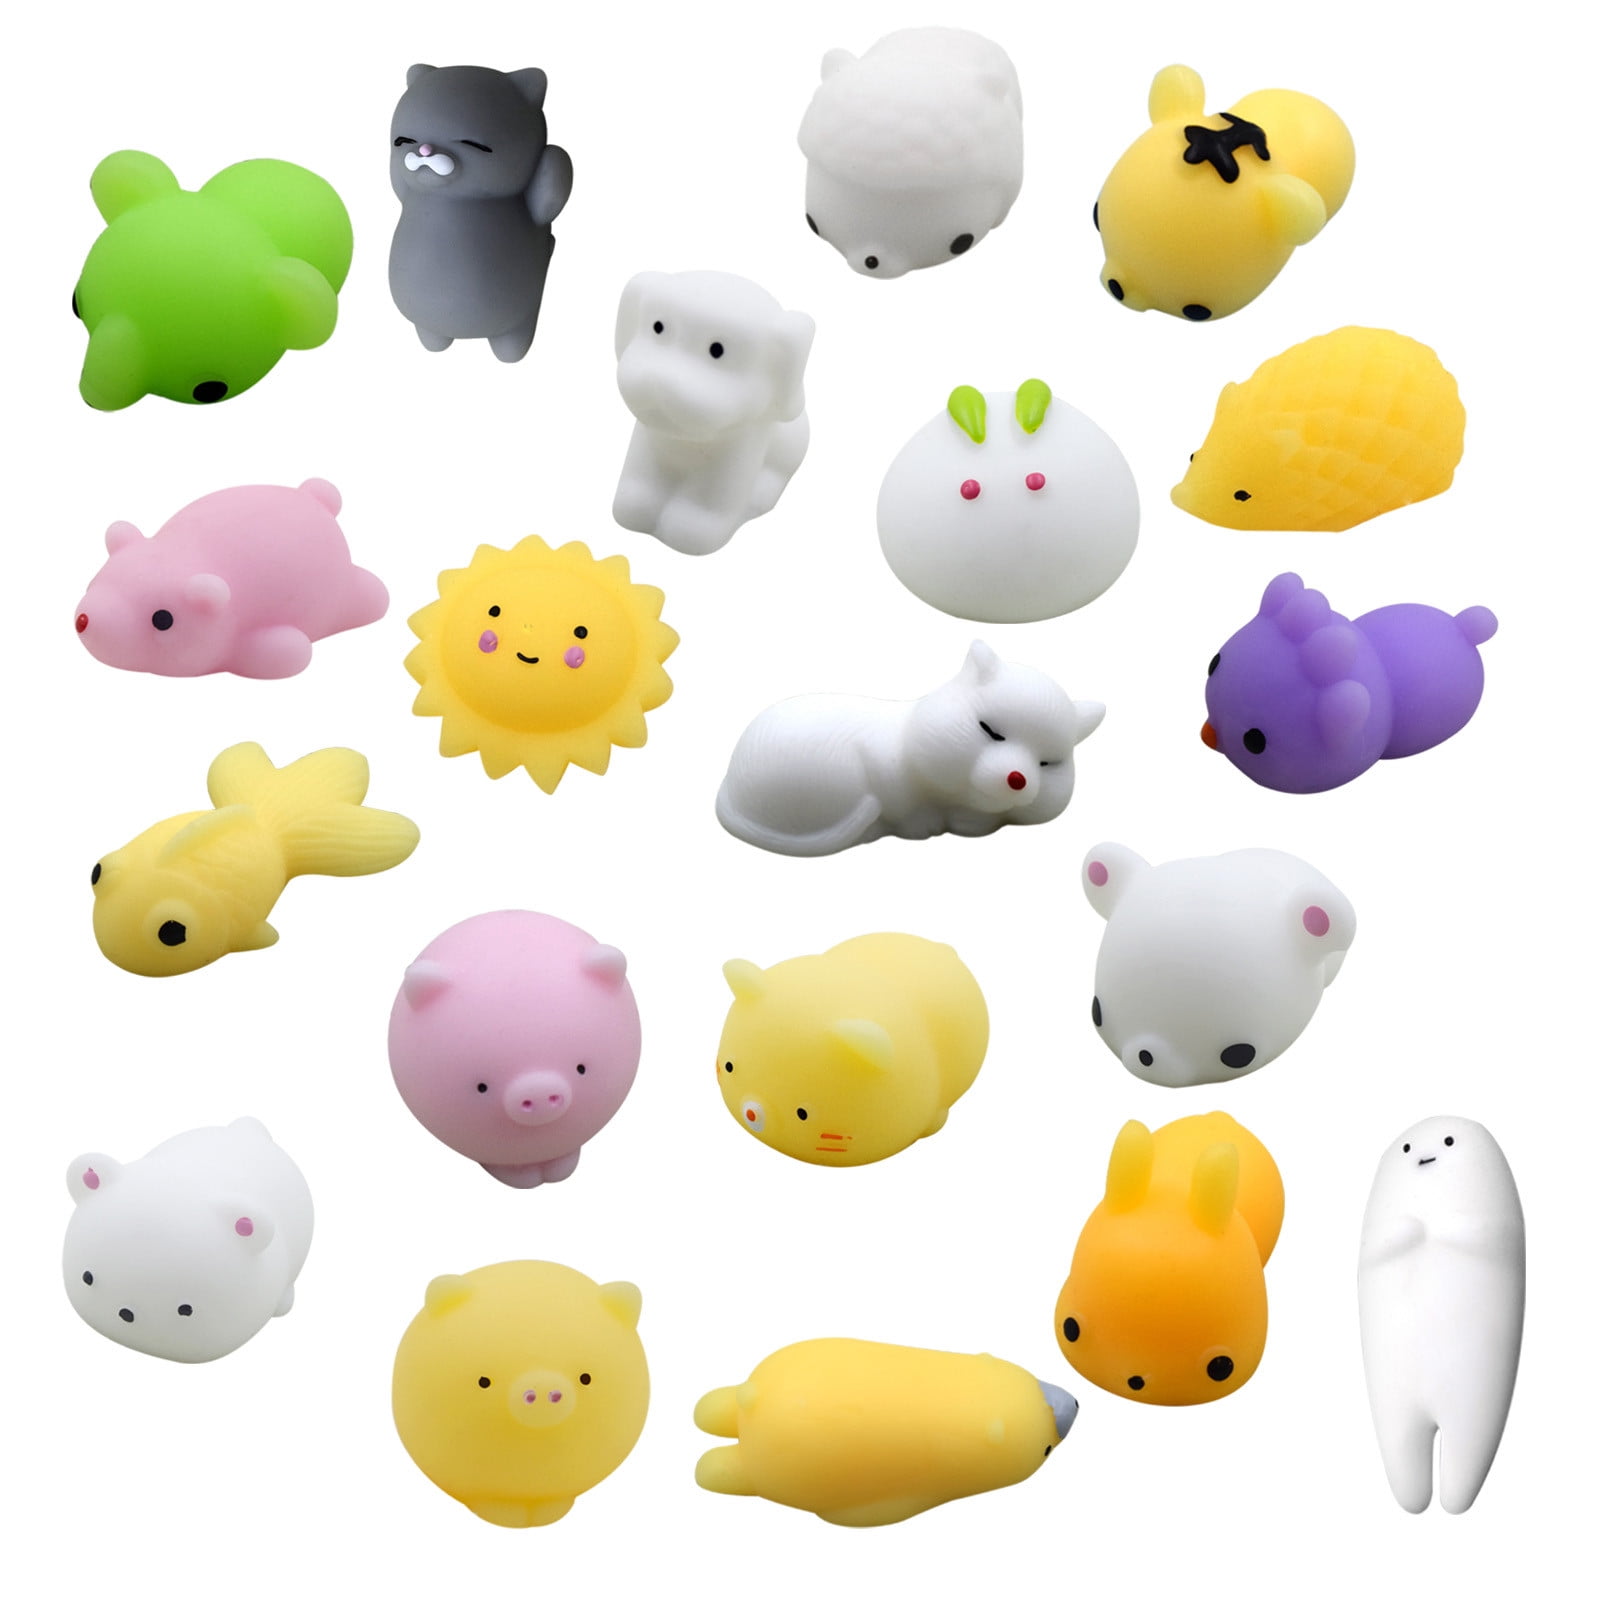 20PCS Cute Animal Toys Stress Relief Set Slow Rising Fidget Toys for Kids Adults 